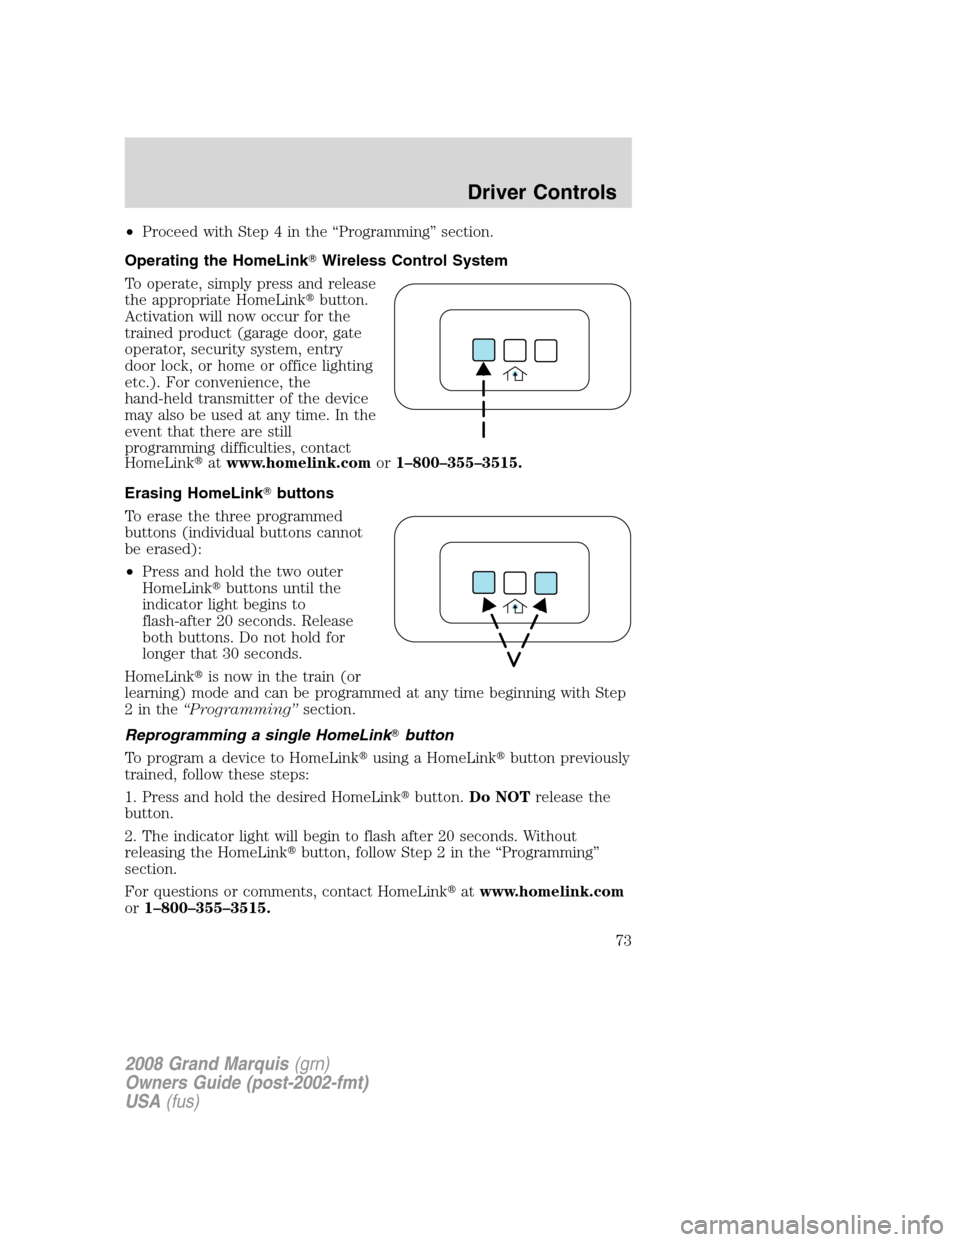 Mercury Grand Marquis 2008  s Manual PDF •Proceed with Step 4 in the “Programming” section.
Operating the HomeLinkWireless Control System
To operate, simply press and release
the appropriate HomeLinkbutton.
Activation will now occur 